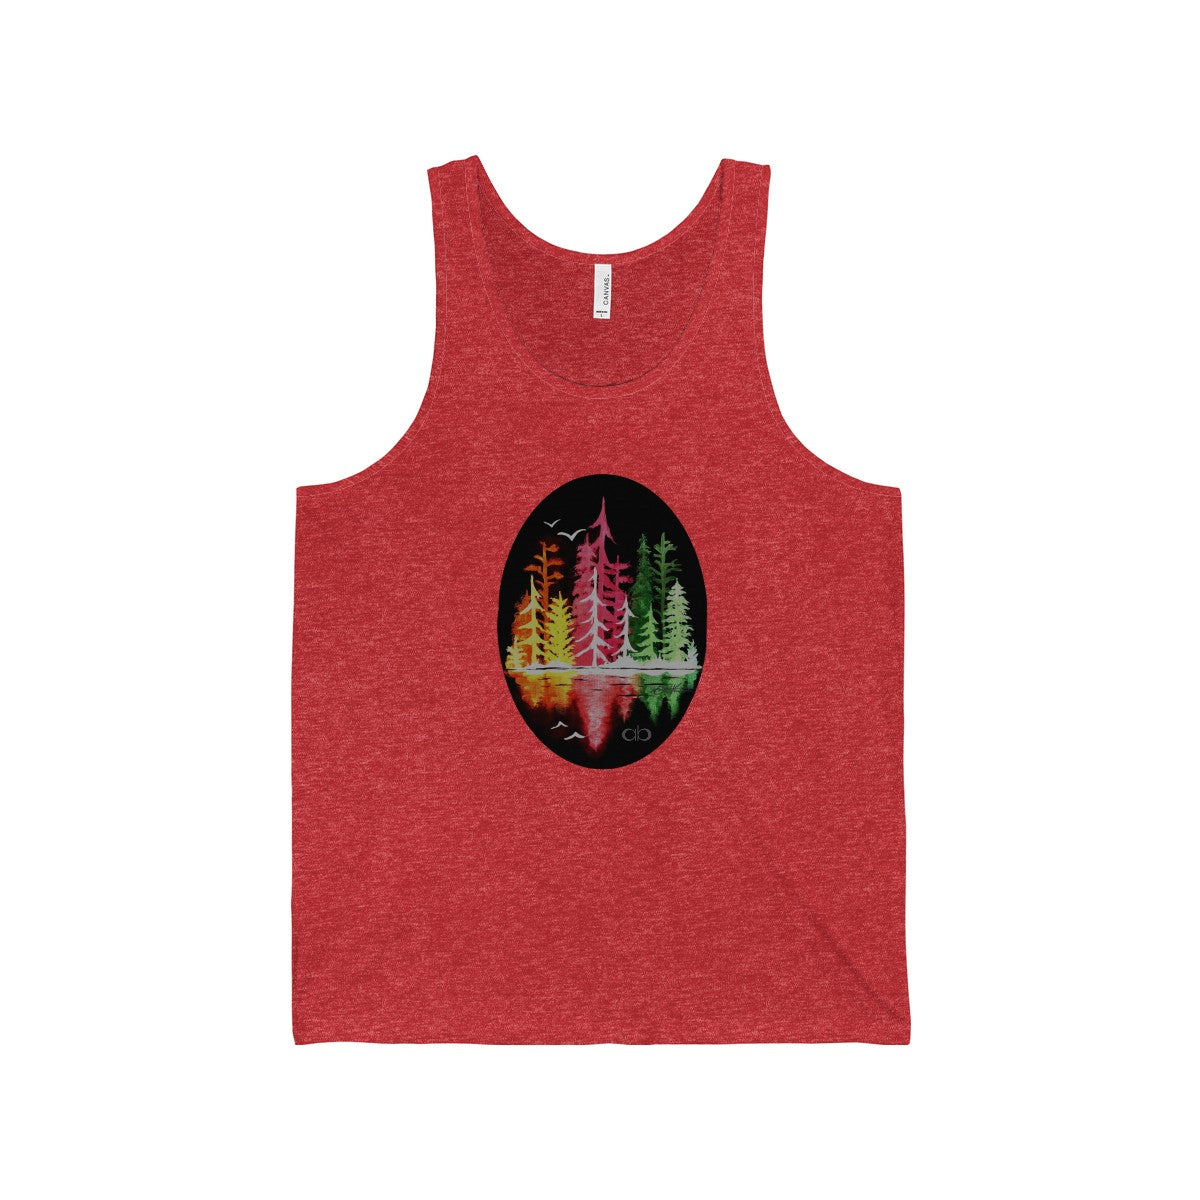 Can You Be More Pacific: Men's Jersey Tank